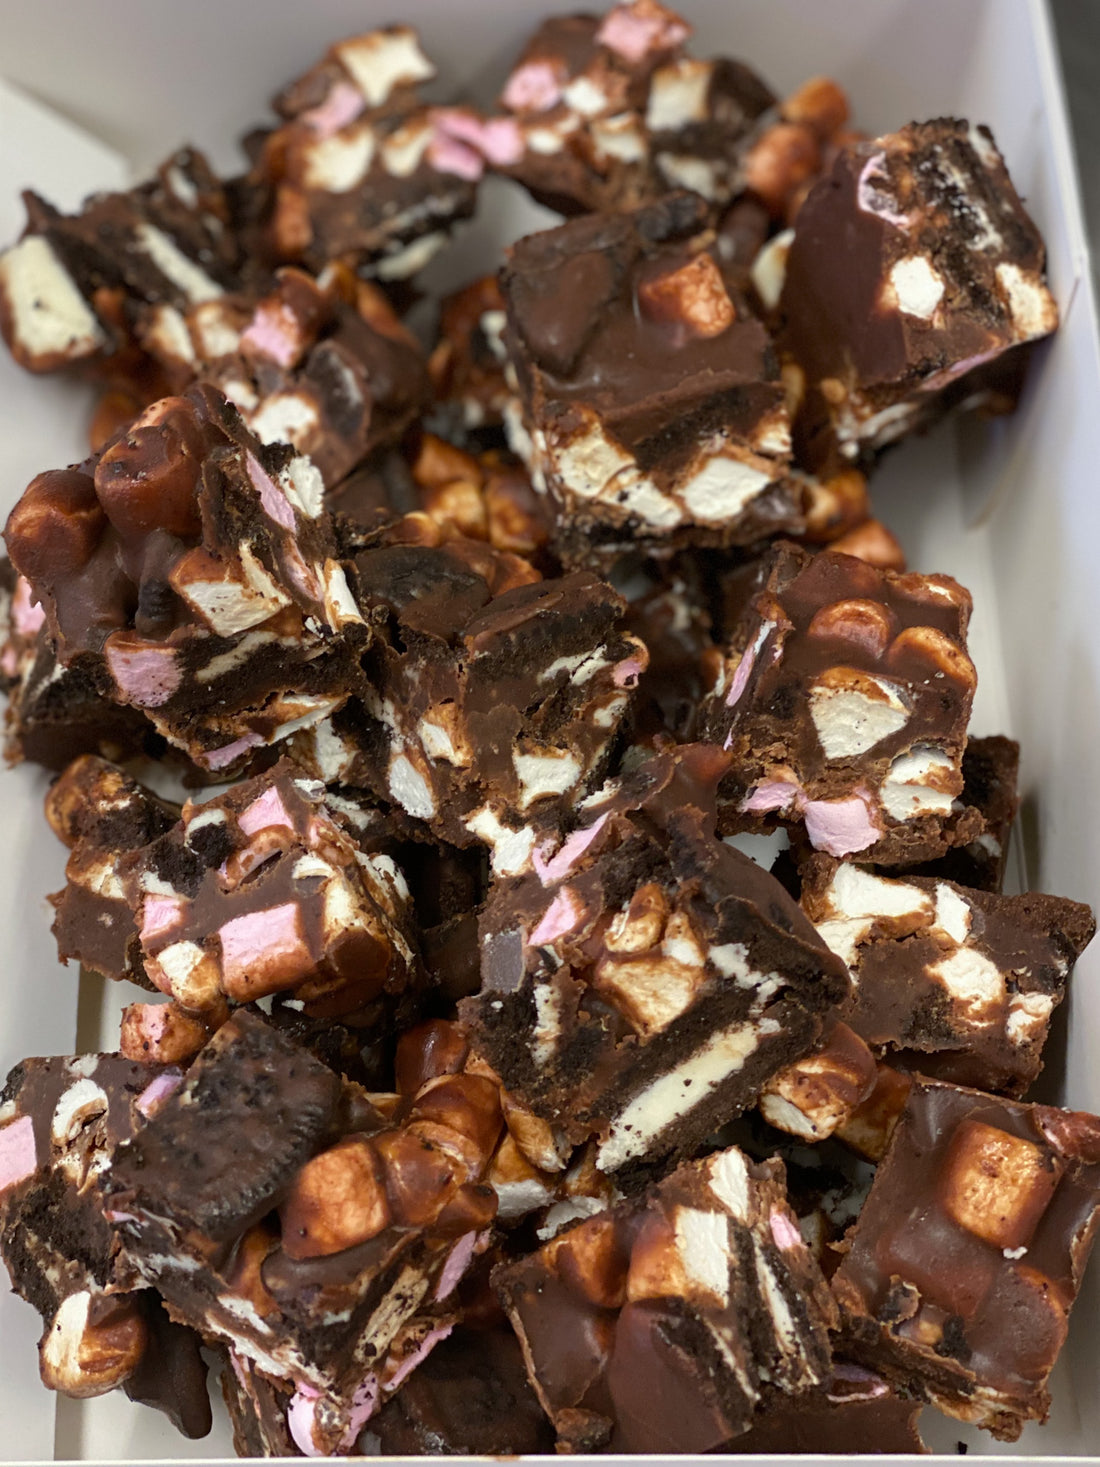  Rocky Road - Mollies Cupcakes